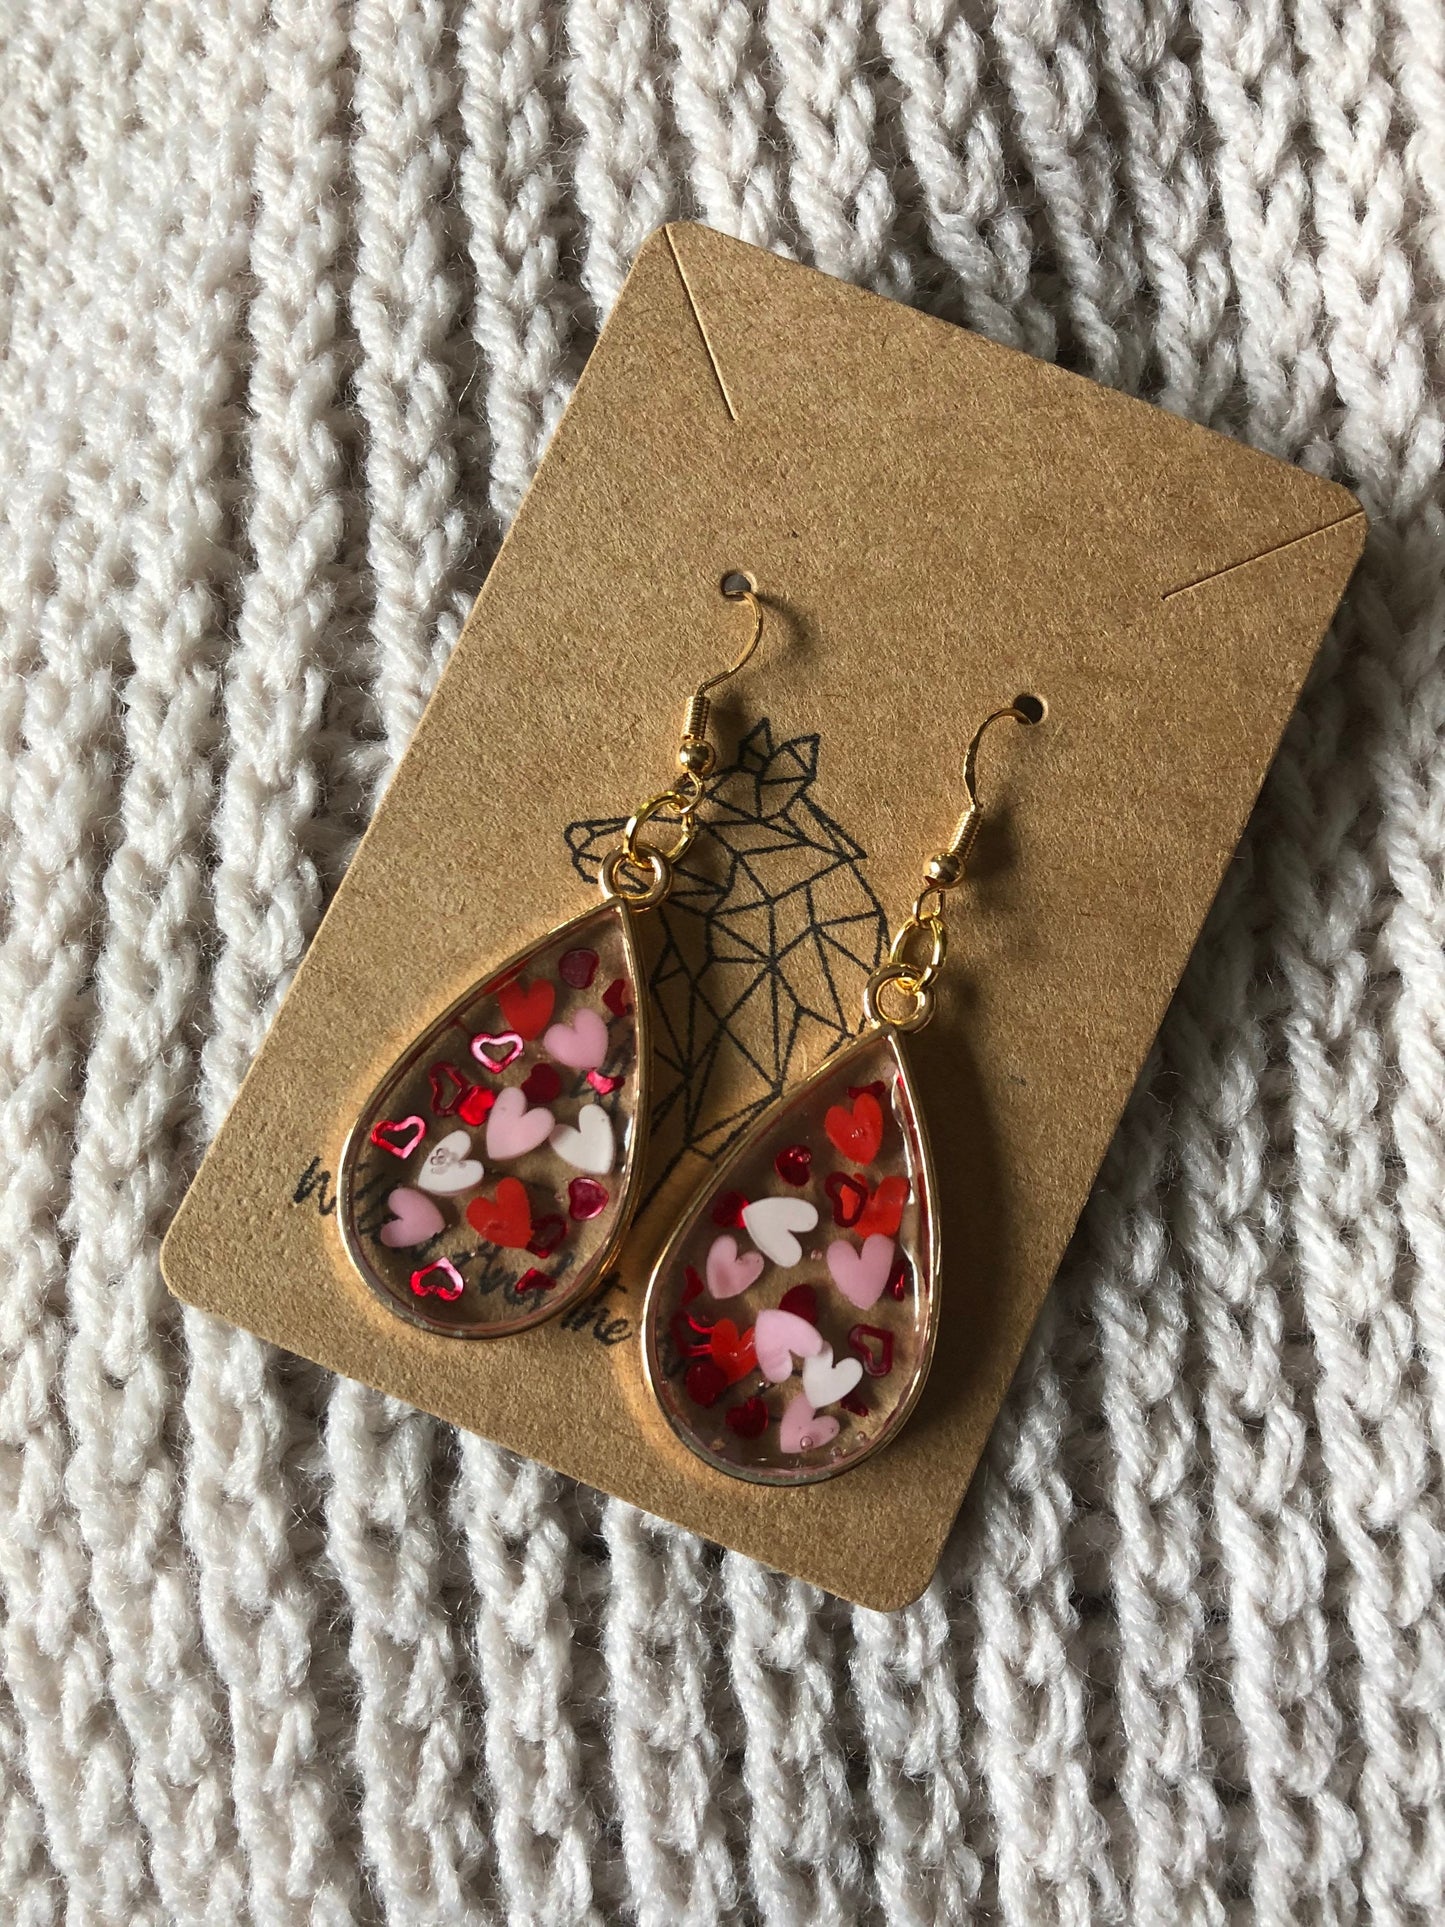 Valentines Day Earrings. Heart Confetti Earrings. Gifts for her. Pink, Red and White Hearts. Resin and Gold Drop Earrings.